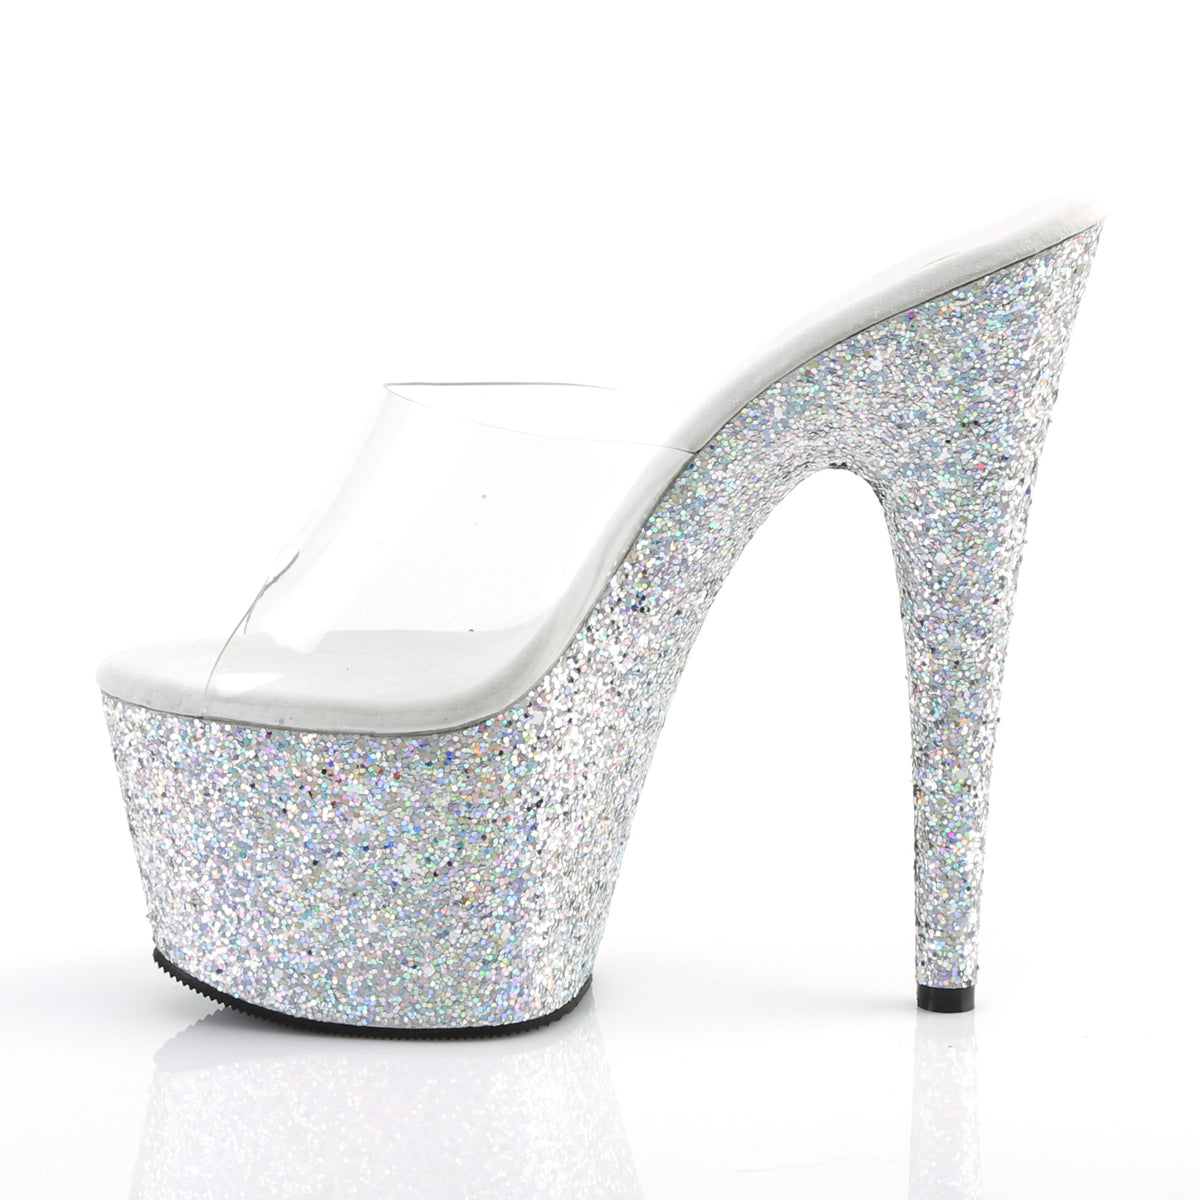 ADORE-701LG 7" Heel Clear Silver Glitter Platforms Sexy Shoe-Pleaser- Sexy Shoes Pole Dance Heels